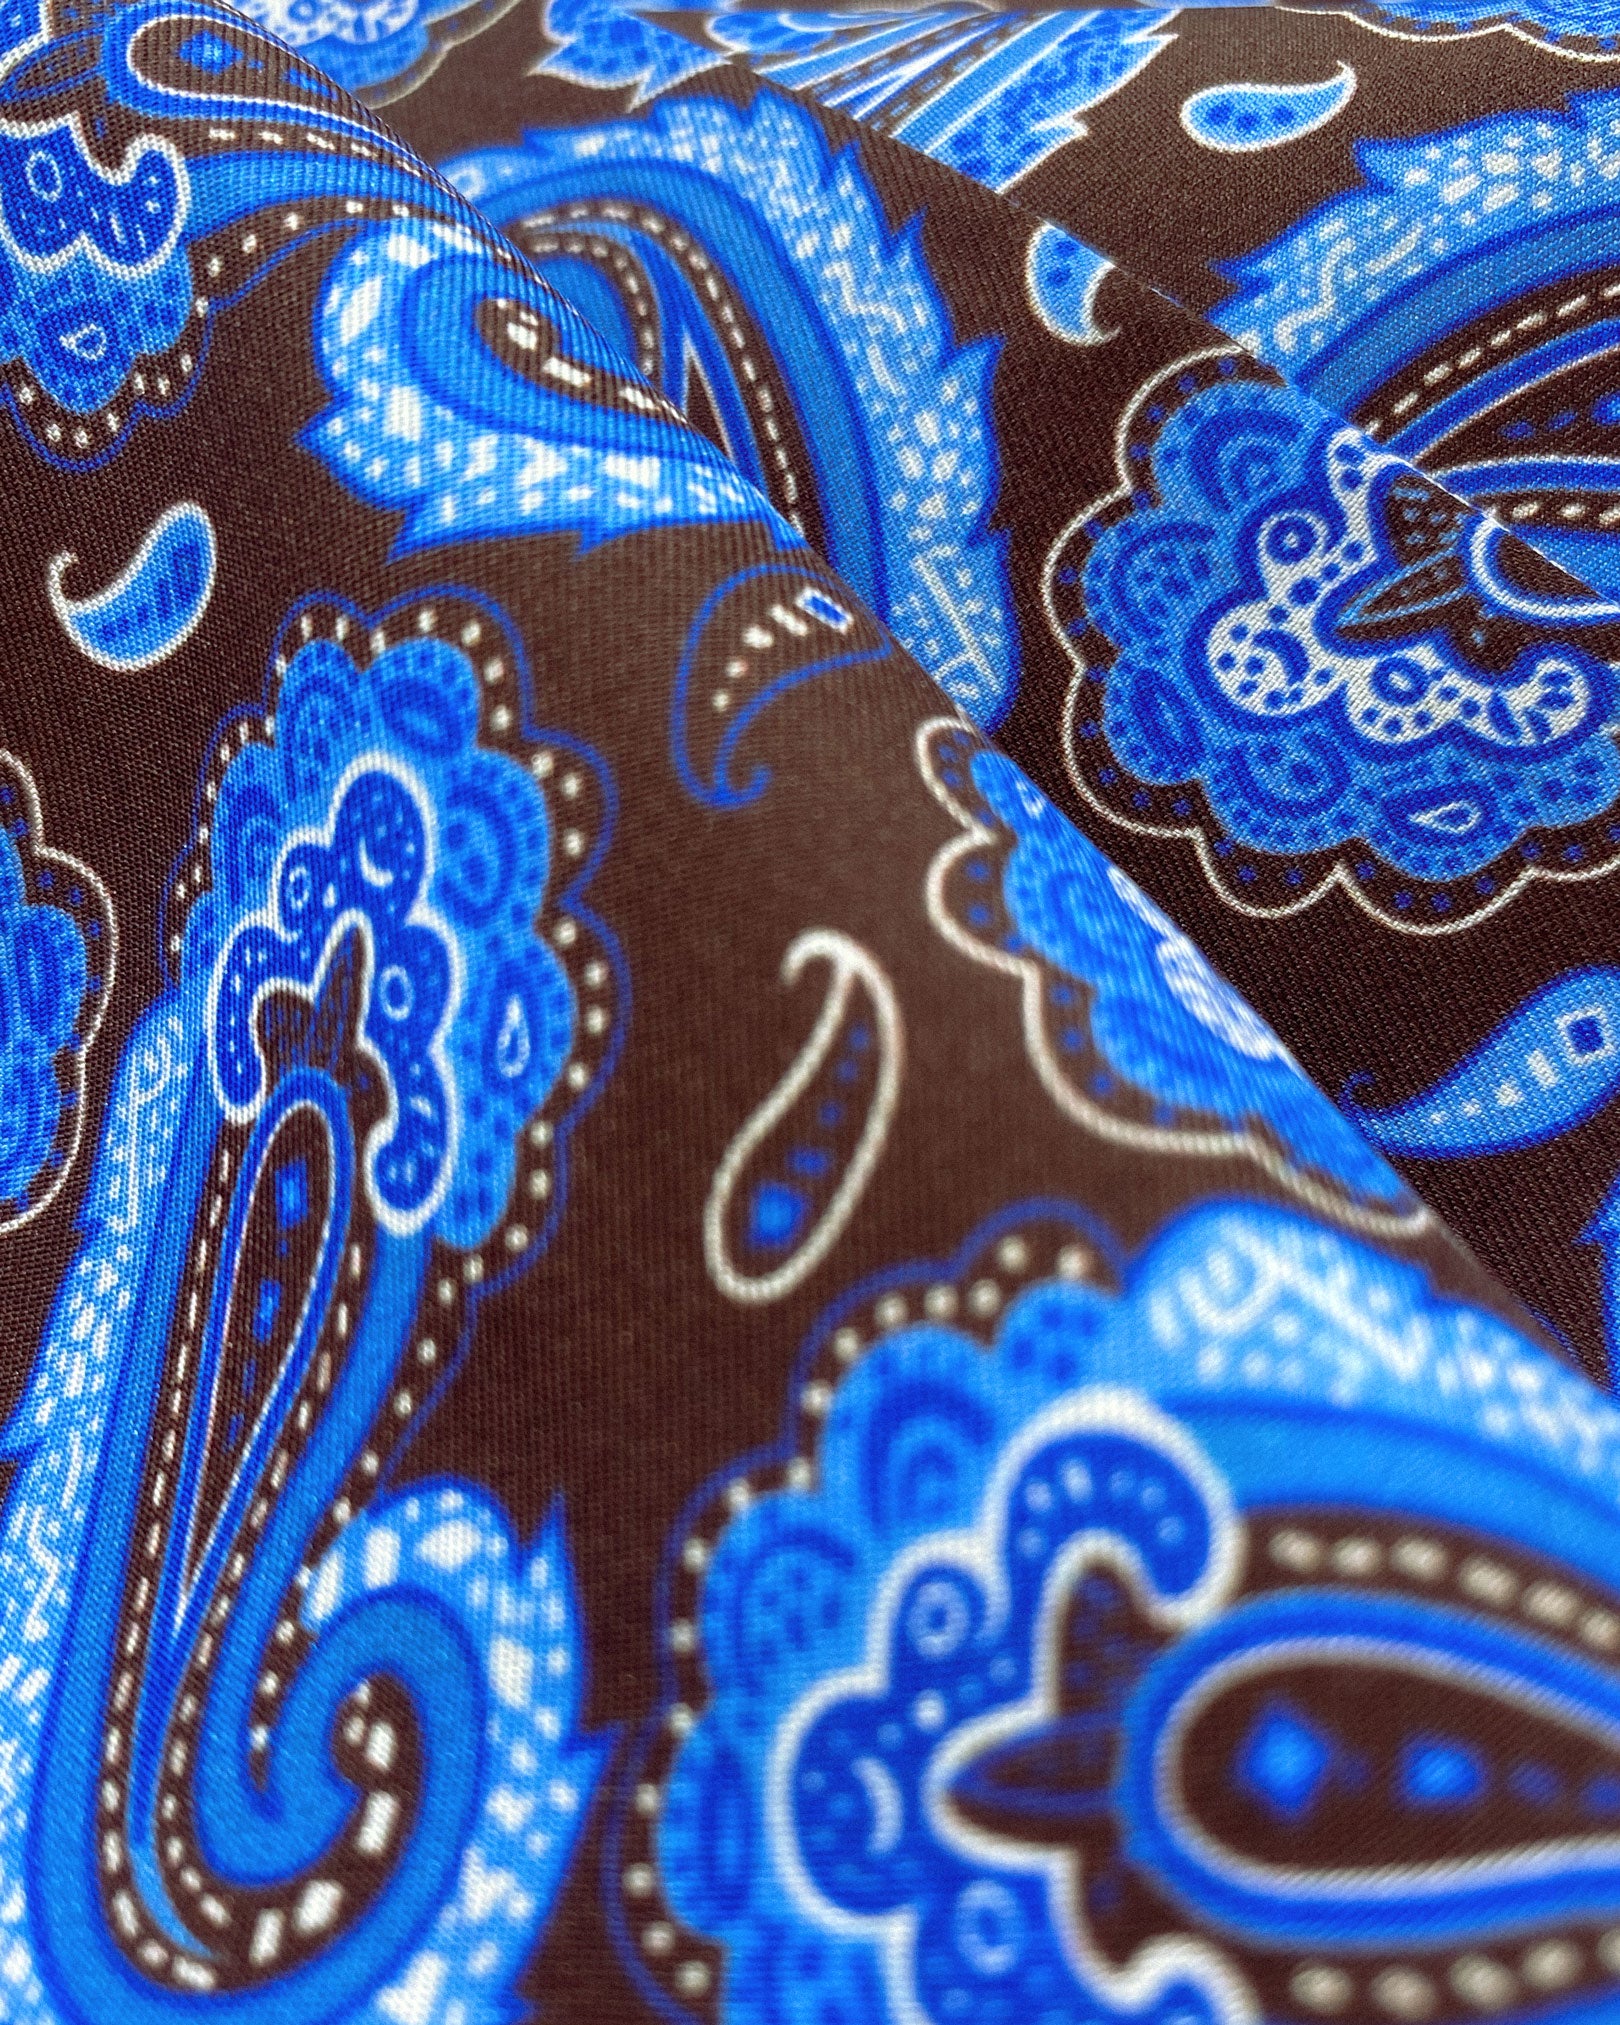 Ruffled close-up view of the 'Myers' silk aviator scarf, presenting a closer view of the powder-blue paisley swirls and subtle lustre of the silk material.